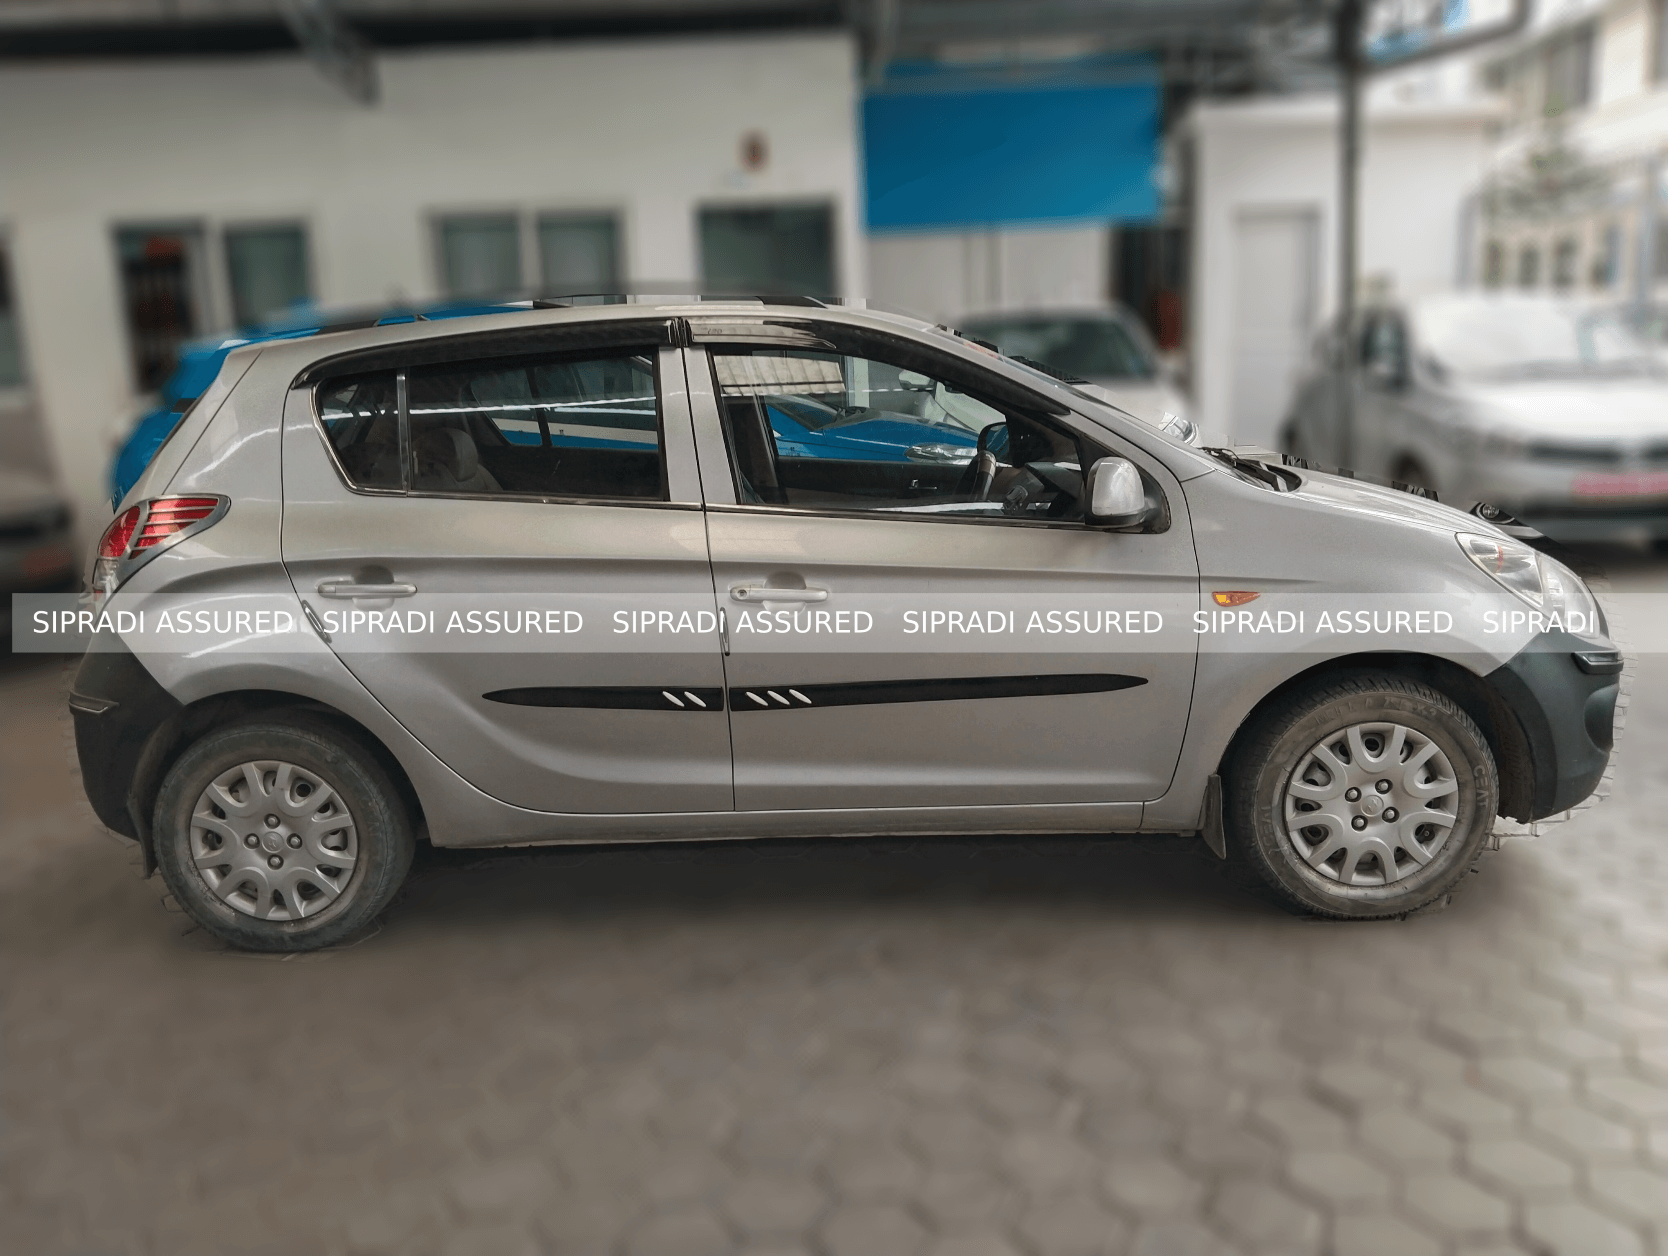 Second hand car Nepal 
Best car exchange  Nepal
Price of used cars
Best place for buying and selling second hand car in Nepal
Second hand cars
Sell used cars
